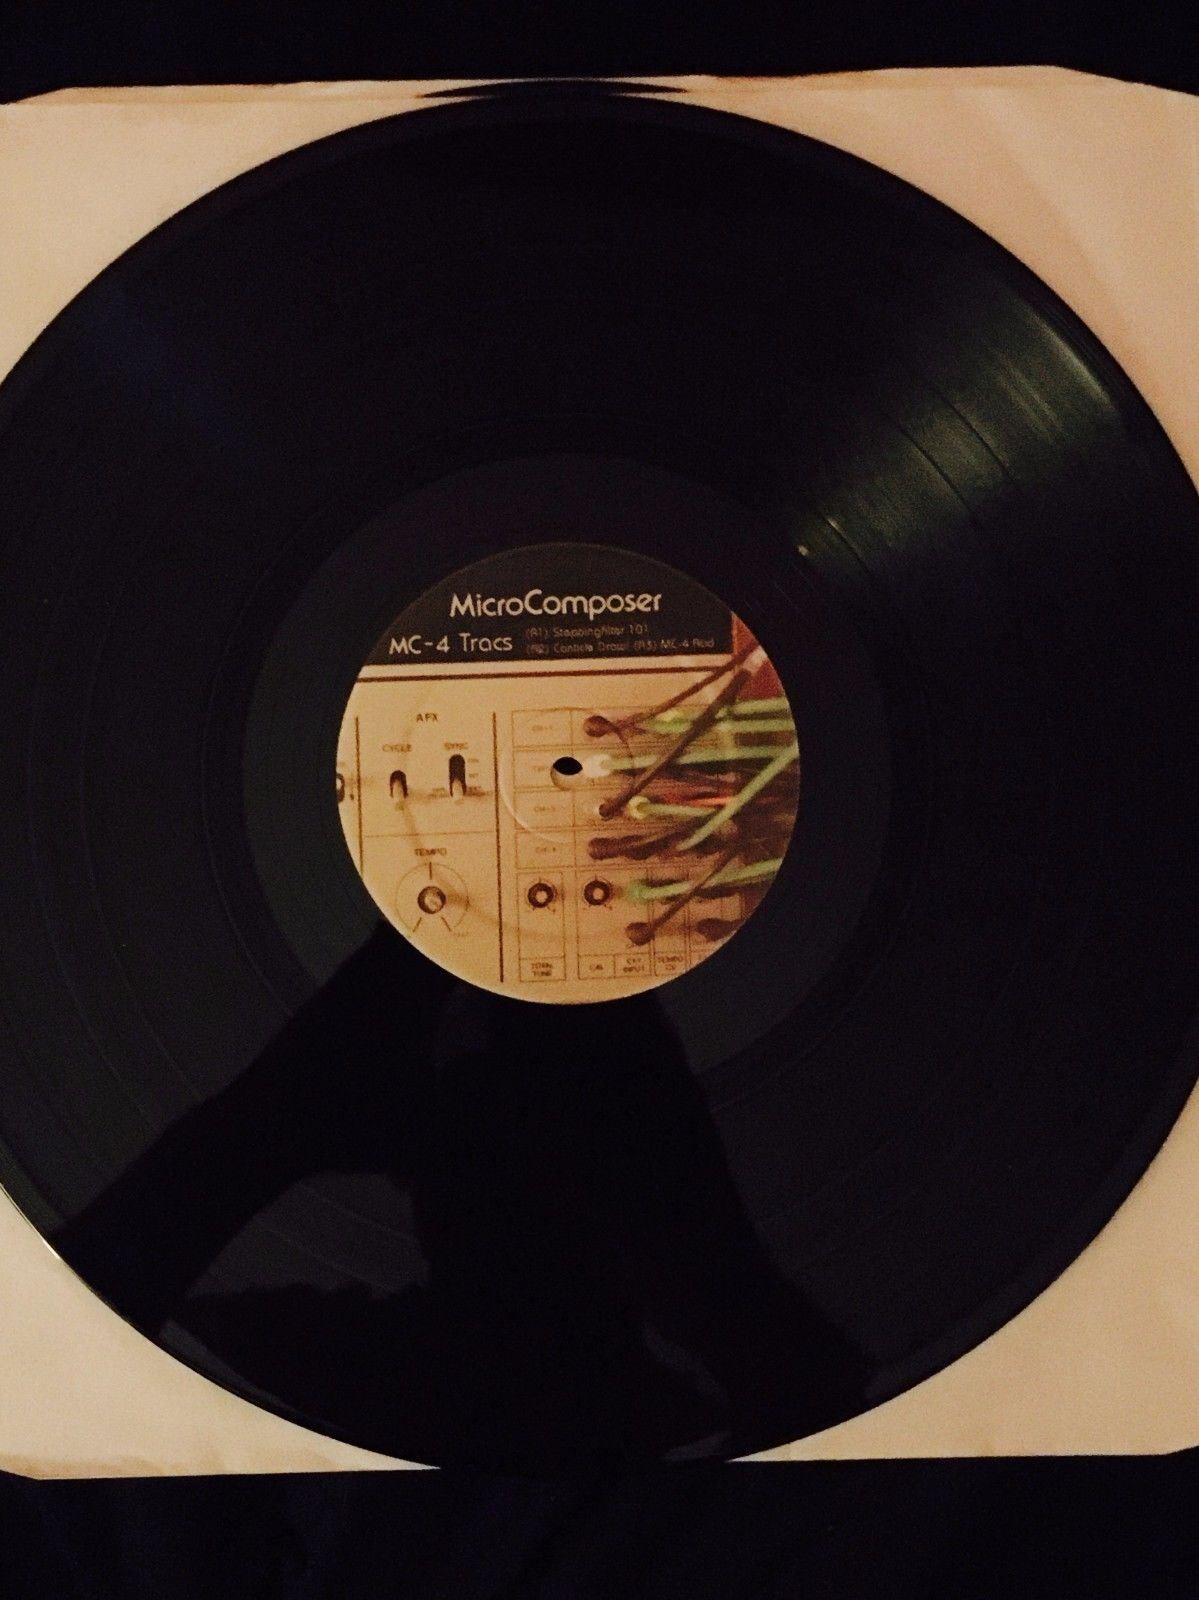 AFX （Aphex Twin）Analord レコード11枚をセット | www.accentdental